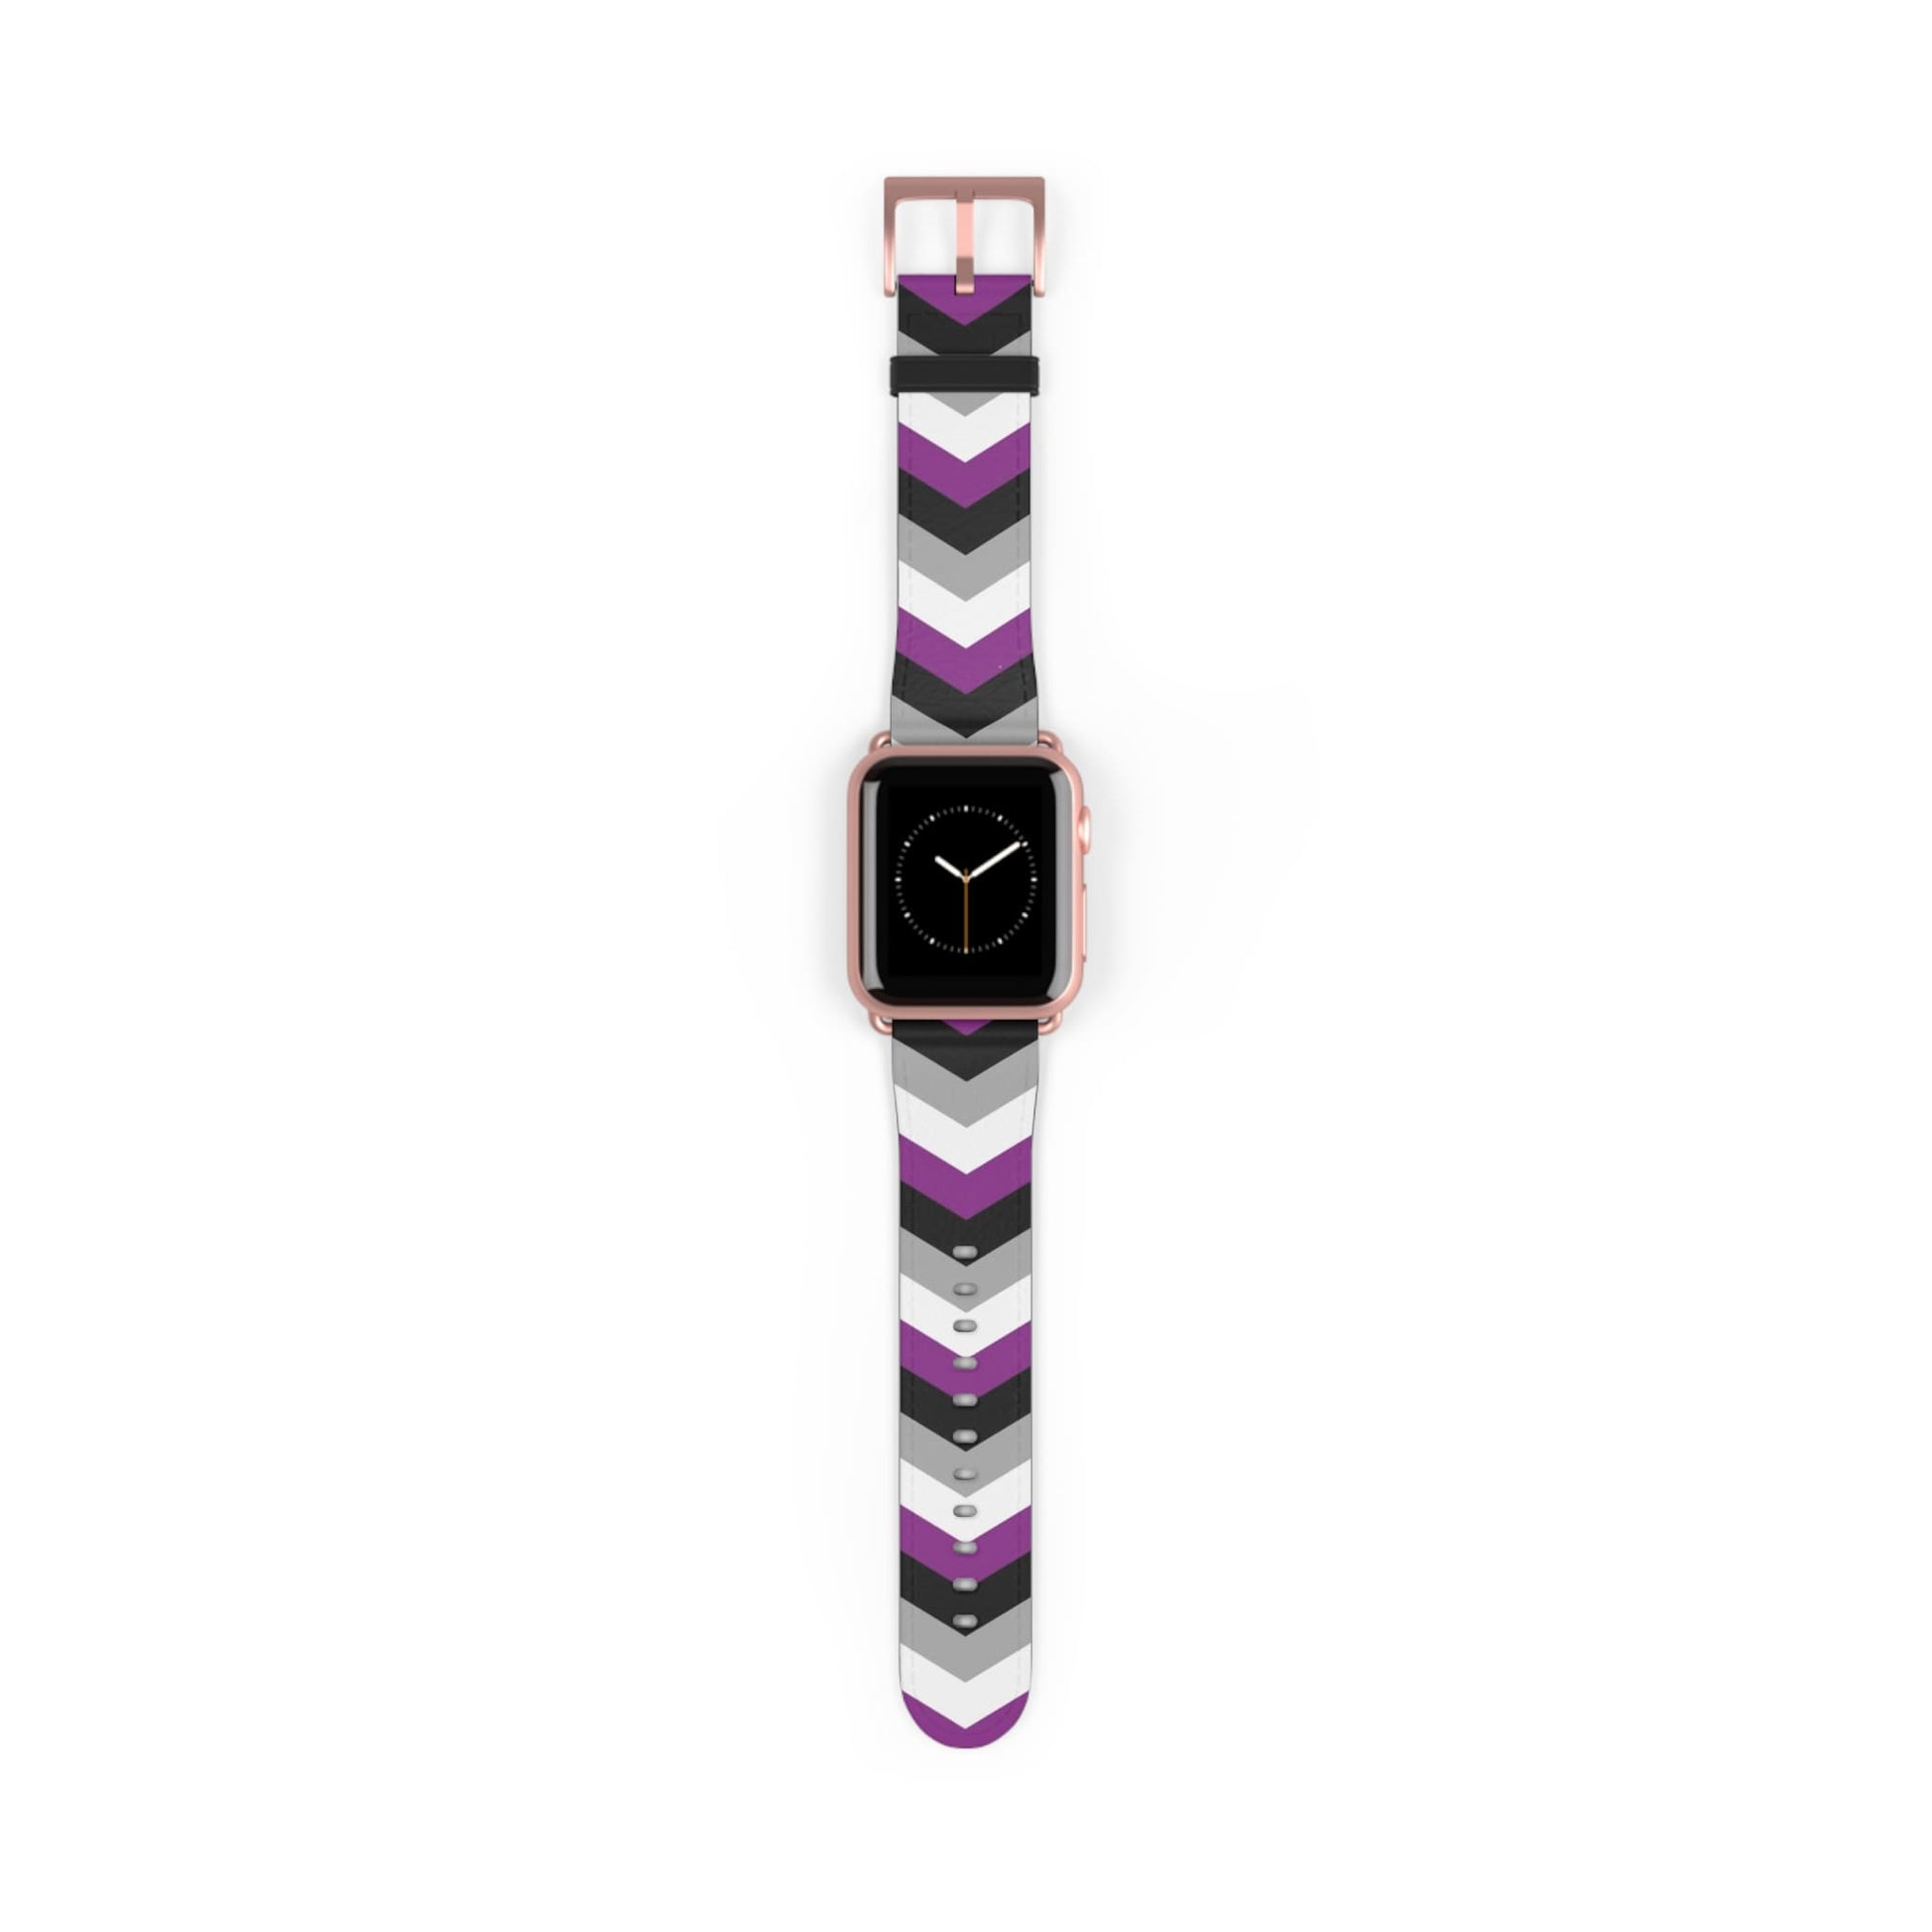 asexual apple watch band, discreet chevron pattern, rose gold